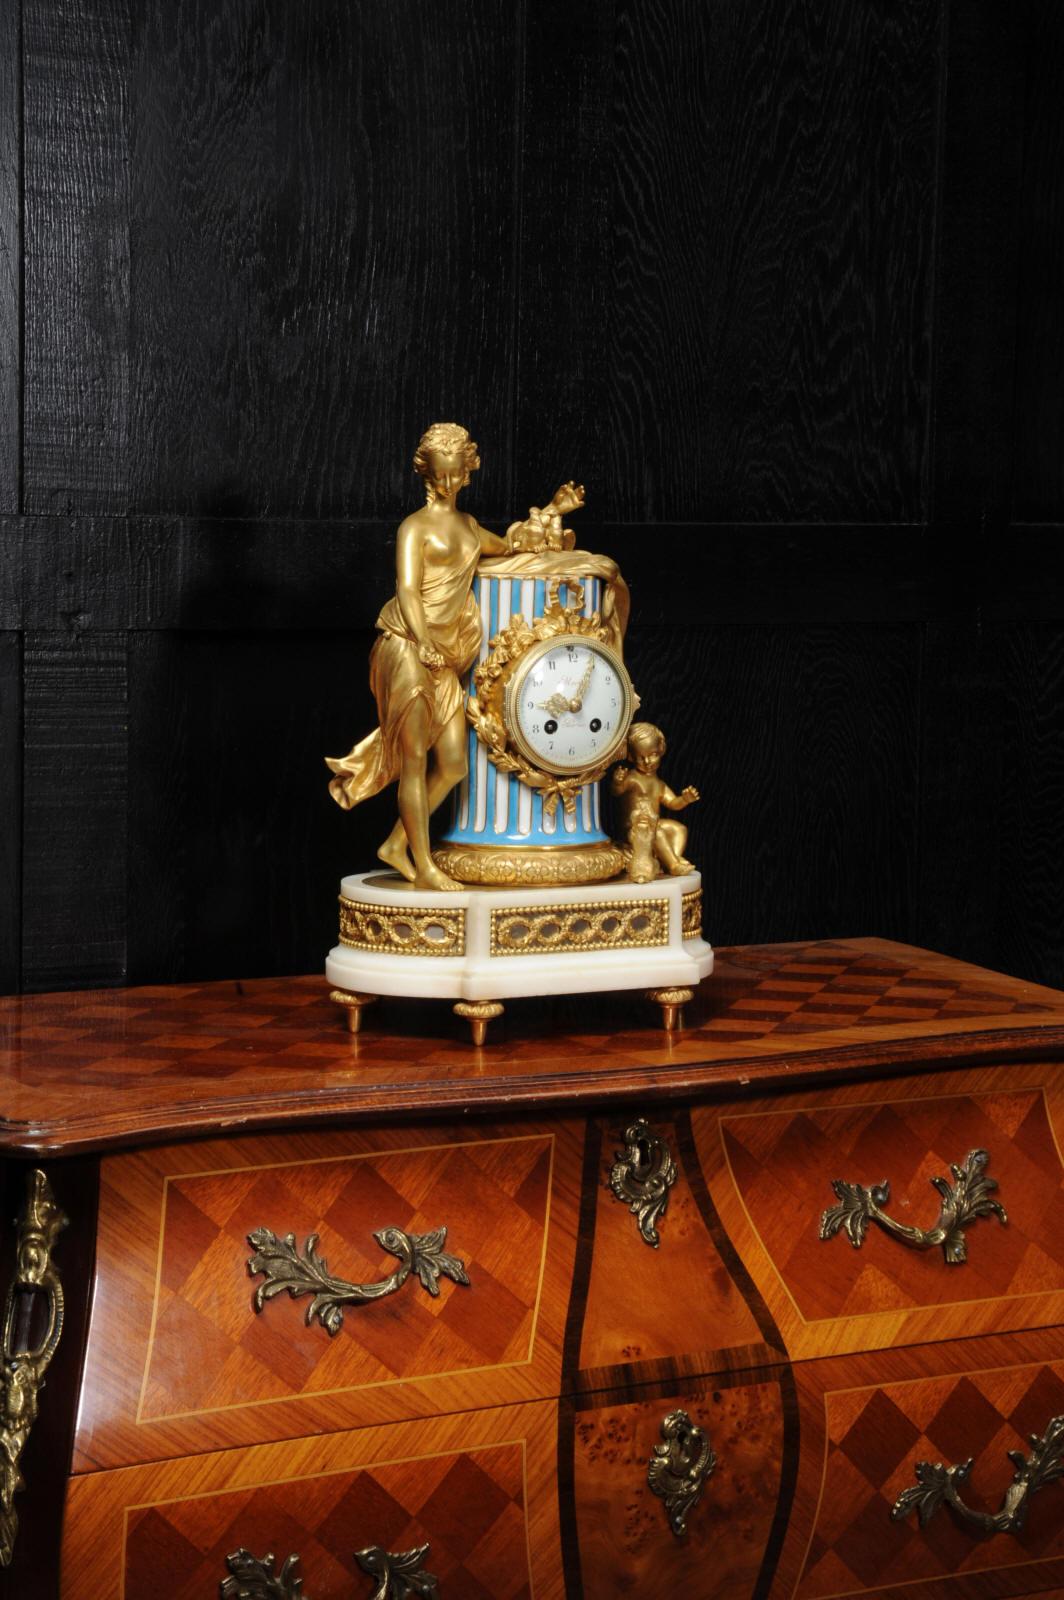 A stunning ormolu and Sèvres style porcelain clock, after the original clock in Marie-Antoinette's apartment in the Palace of Versailles. It dates from circa 1870. Venus is beautifully depicted leaning on a classical column with two doves, two